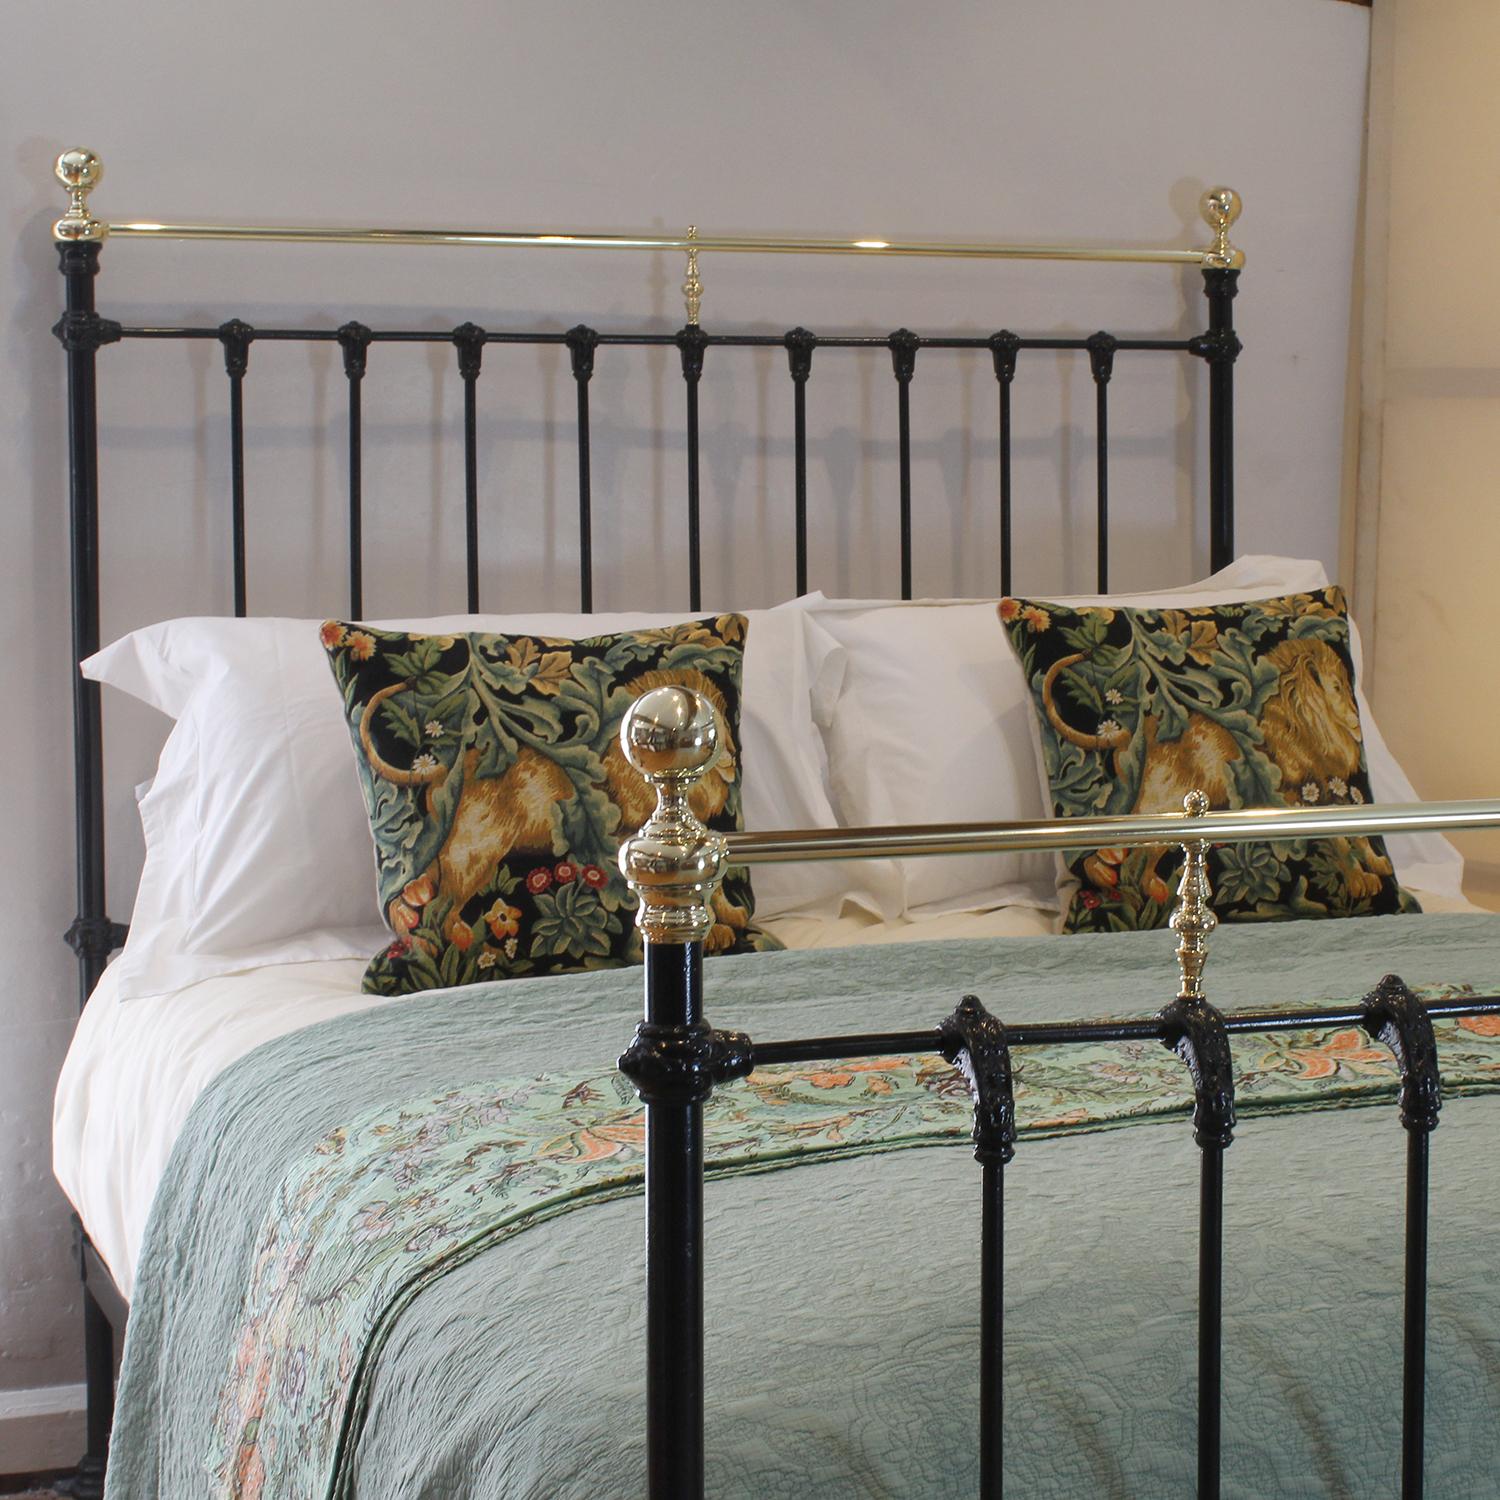 Late Victorian Victorian Antique Bed in Black, MK281